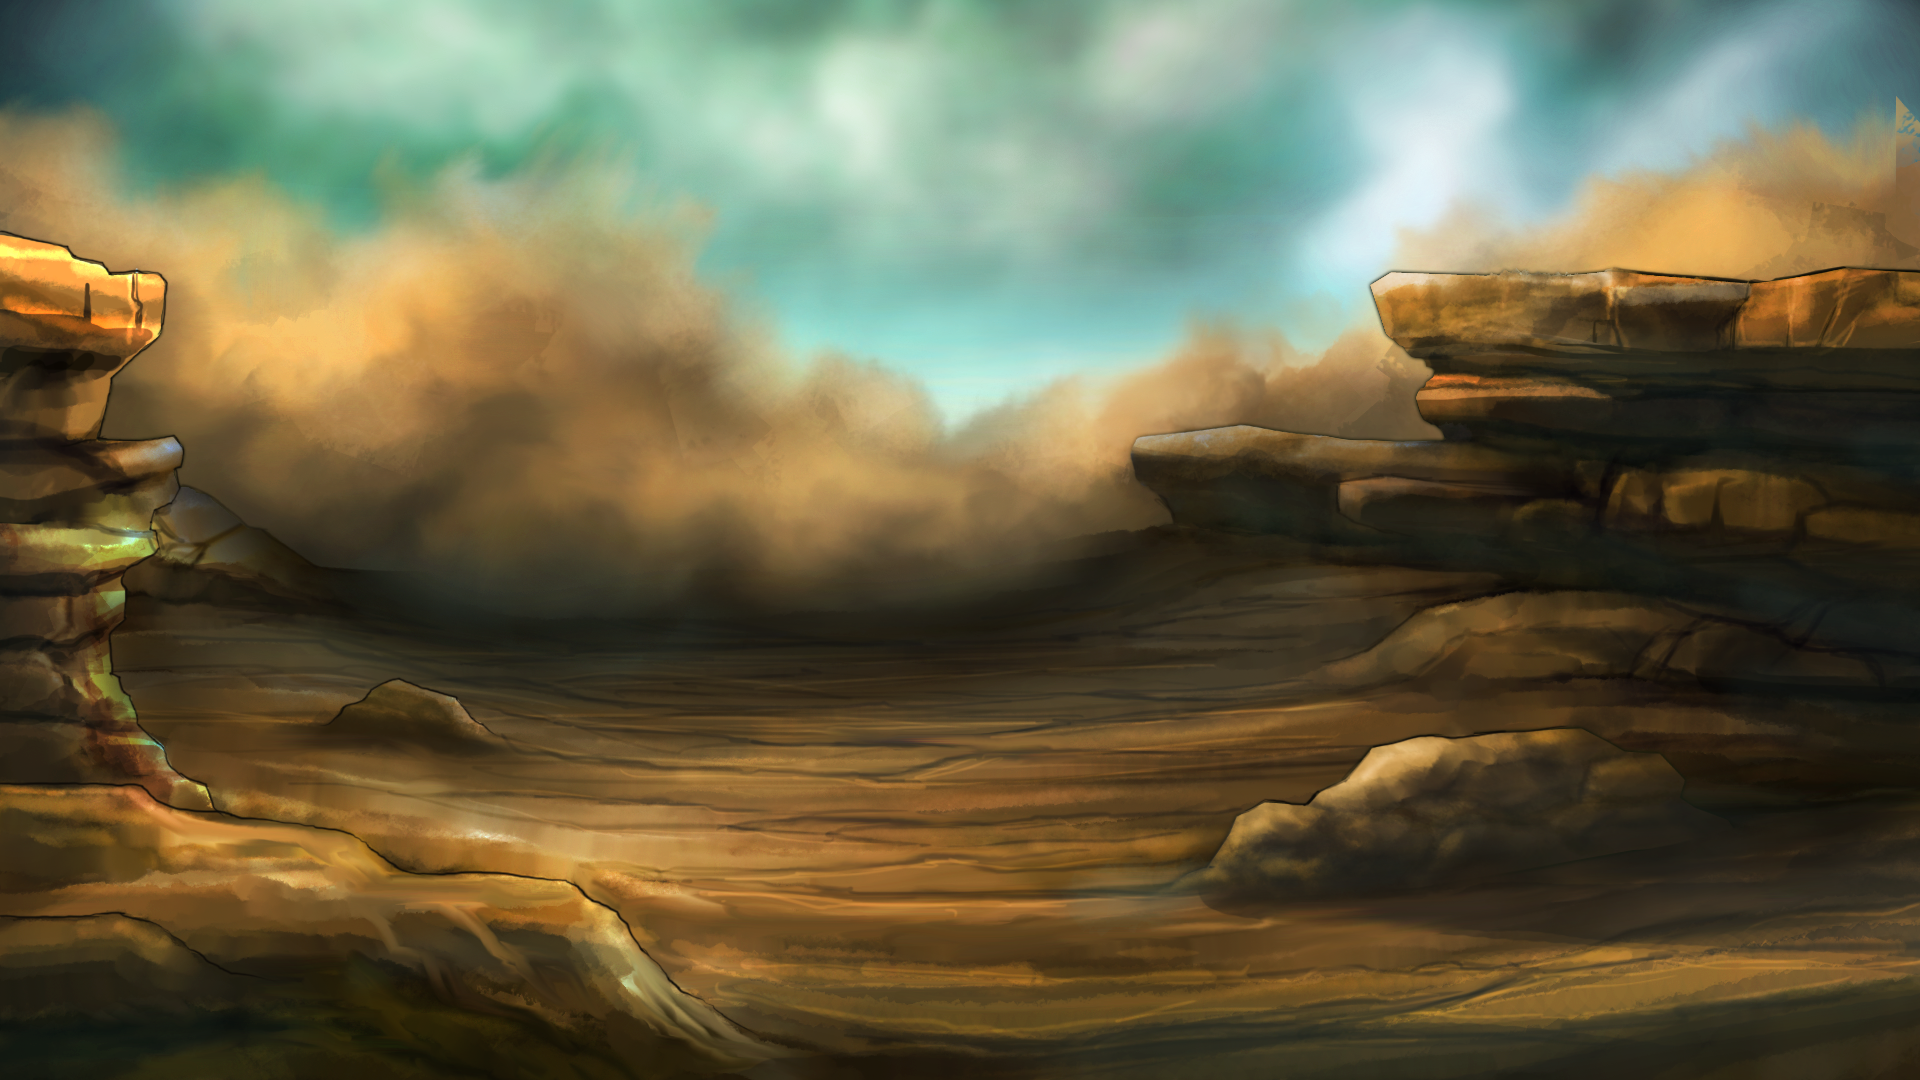 File:Painting-lombarddesert.png